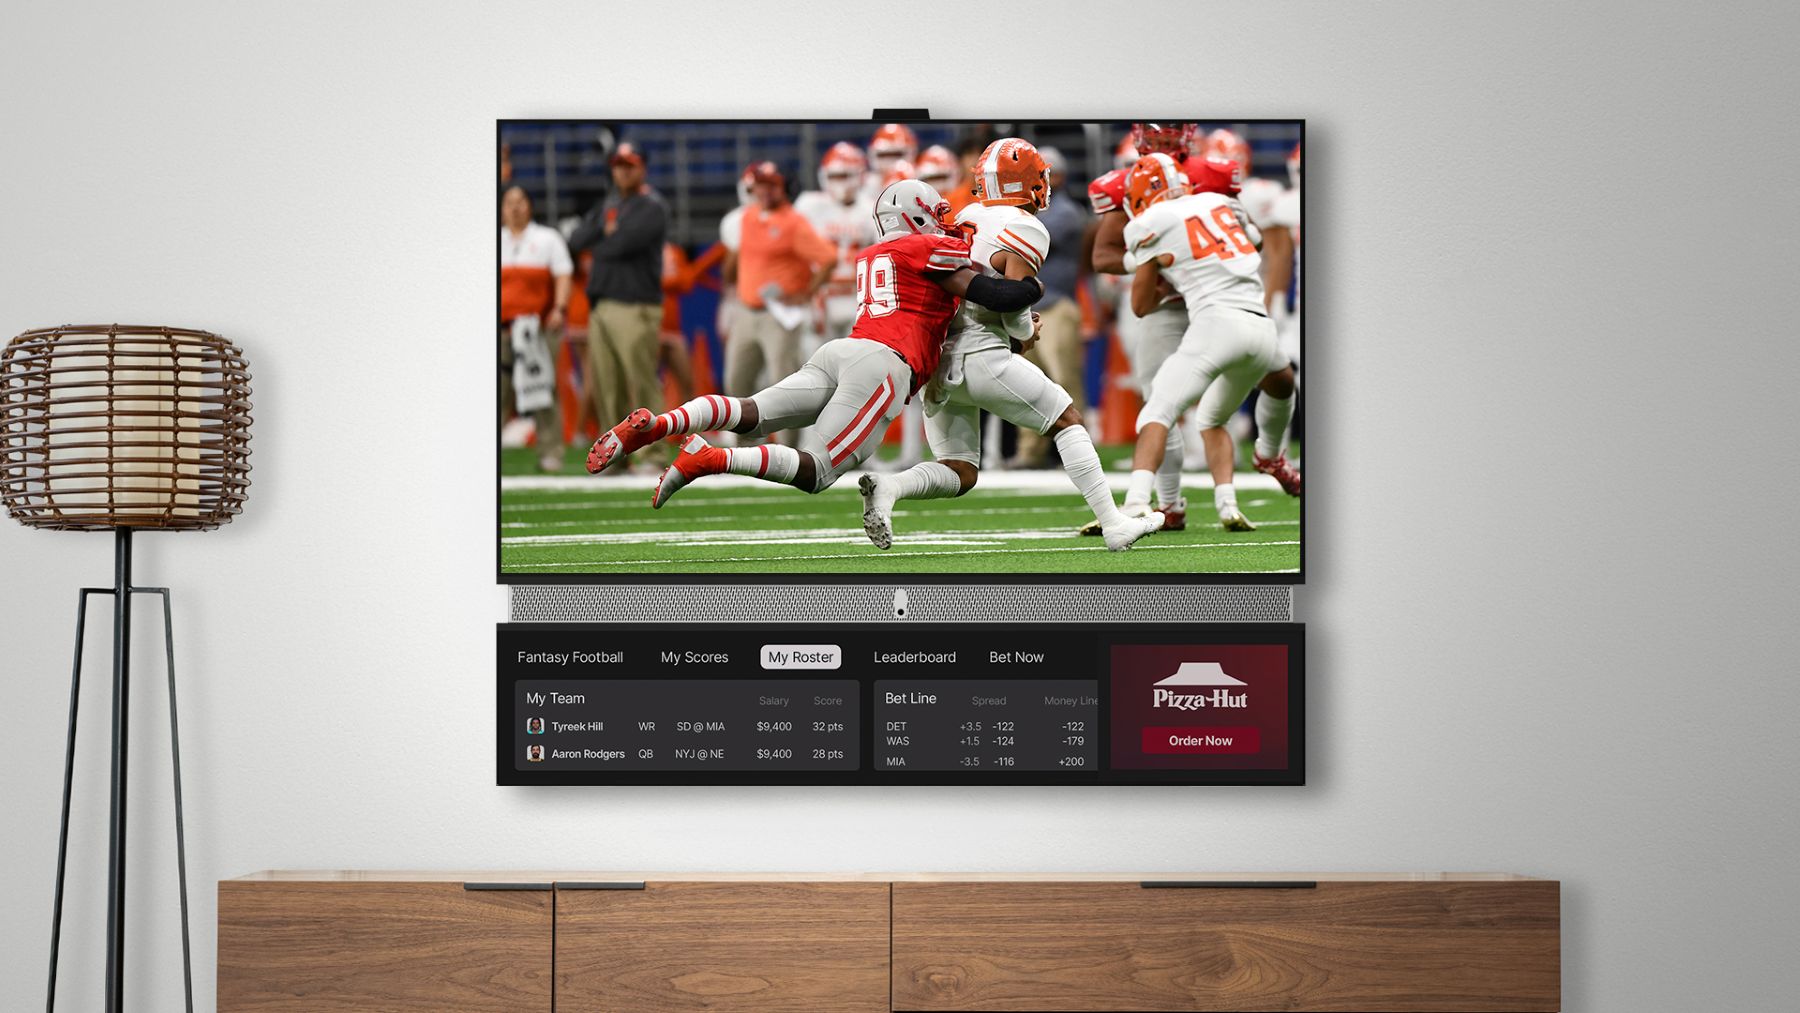 Telly’s Free 55” 4K Dual-Screen TVs Begin Shipping to Consumers